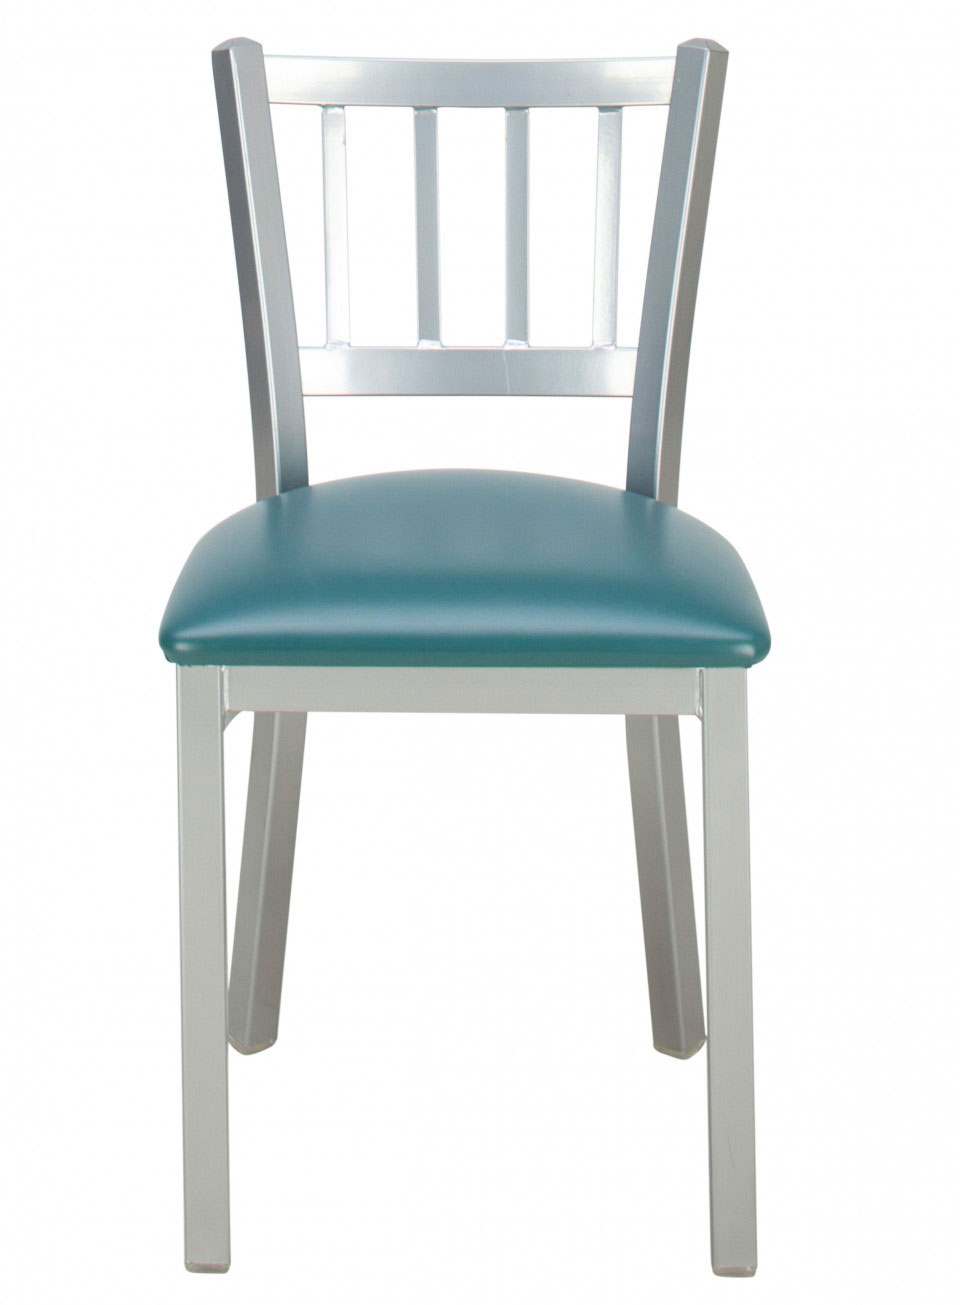 4_CT-302_UPHOLSTERED-SEAT_FRONT-VIEW-Copy-960x1305